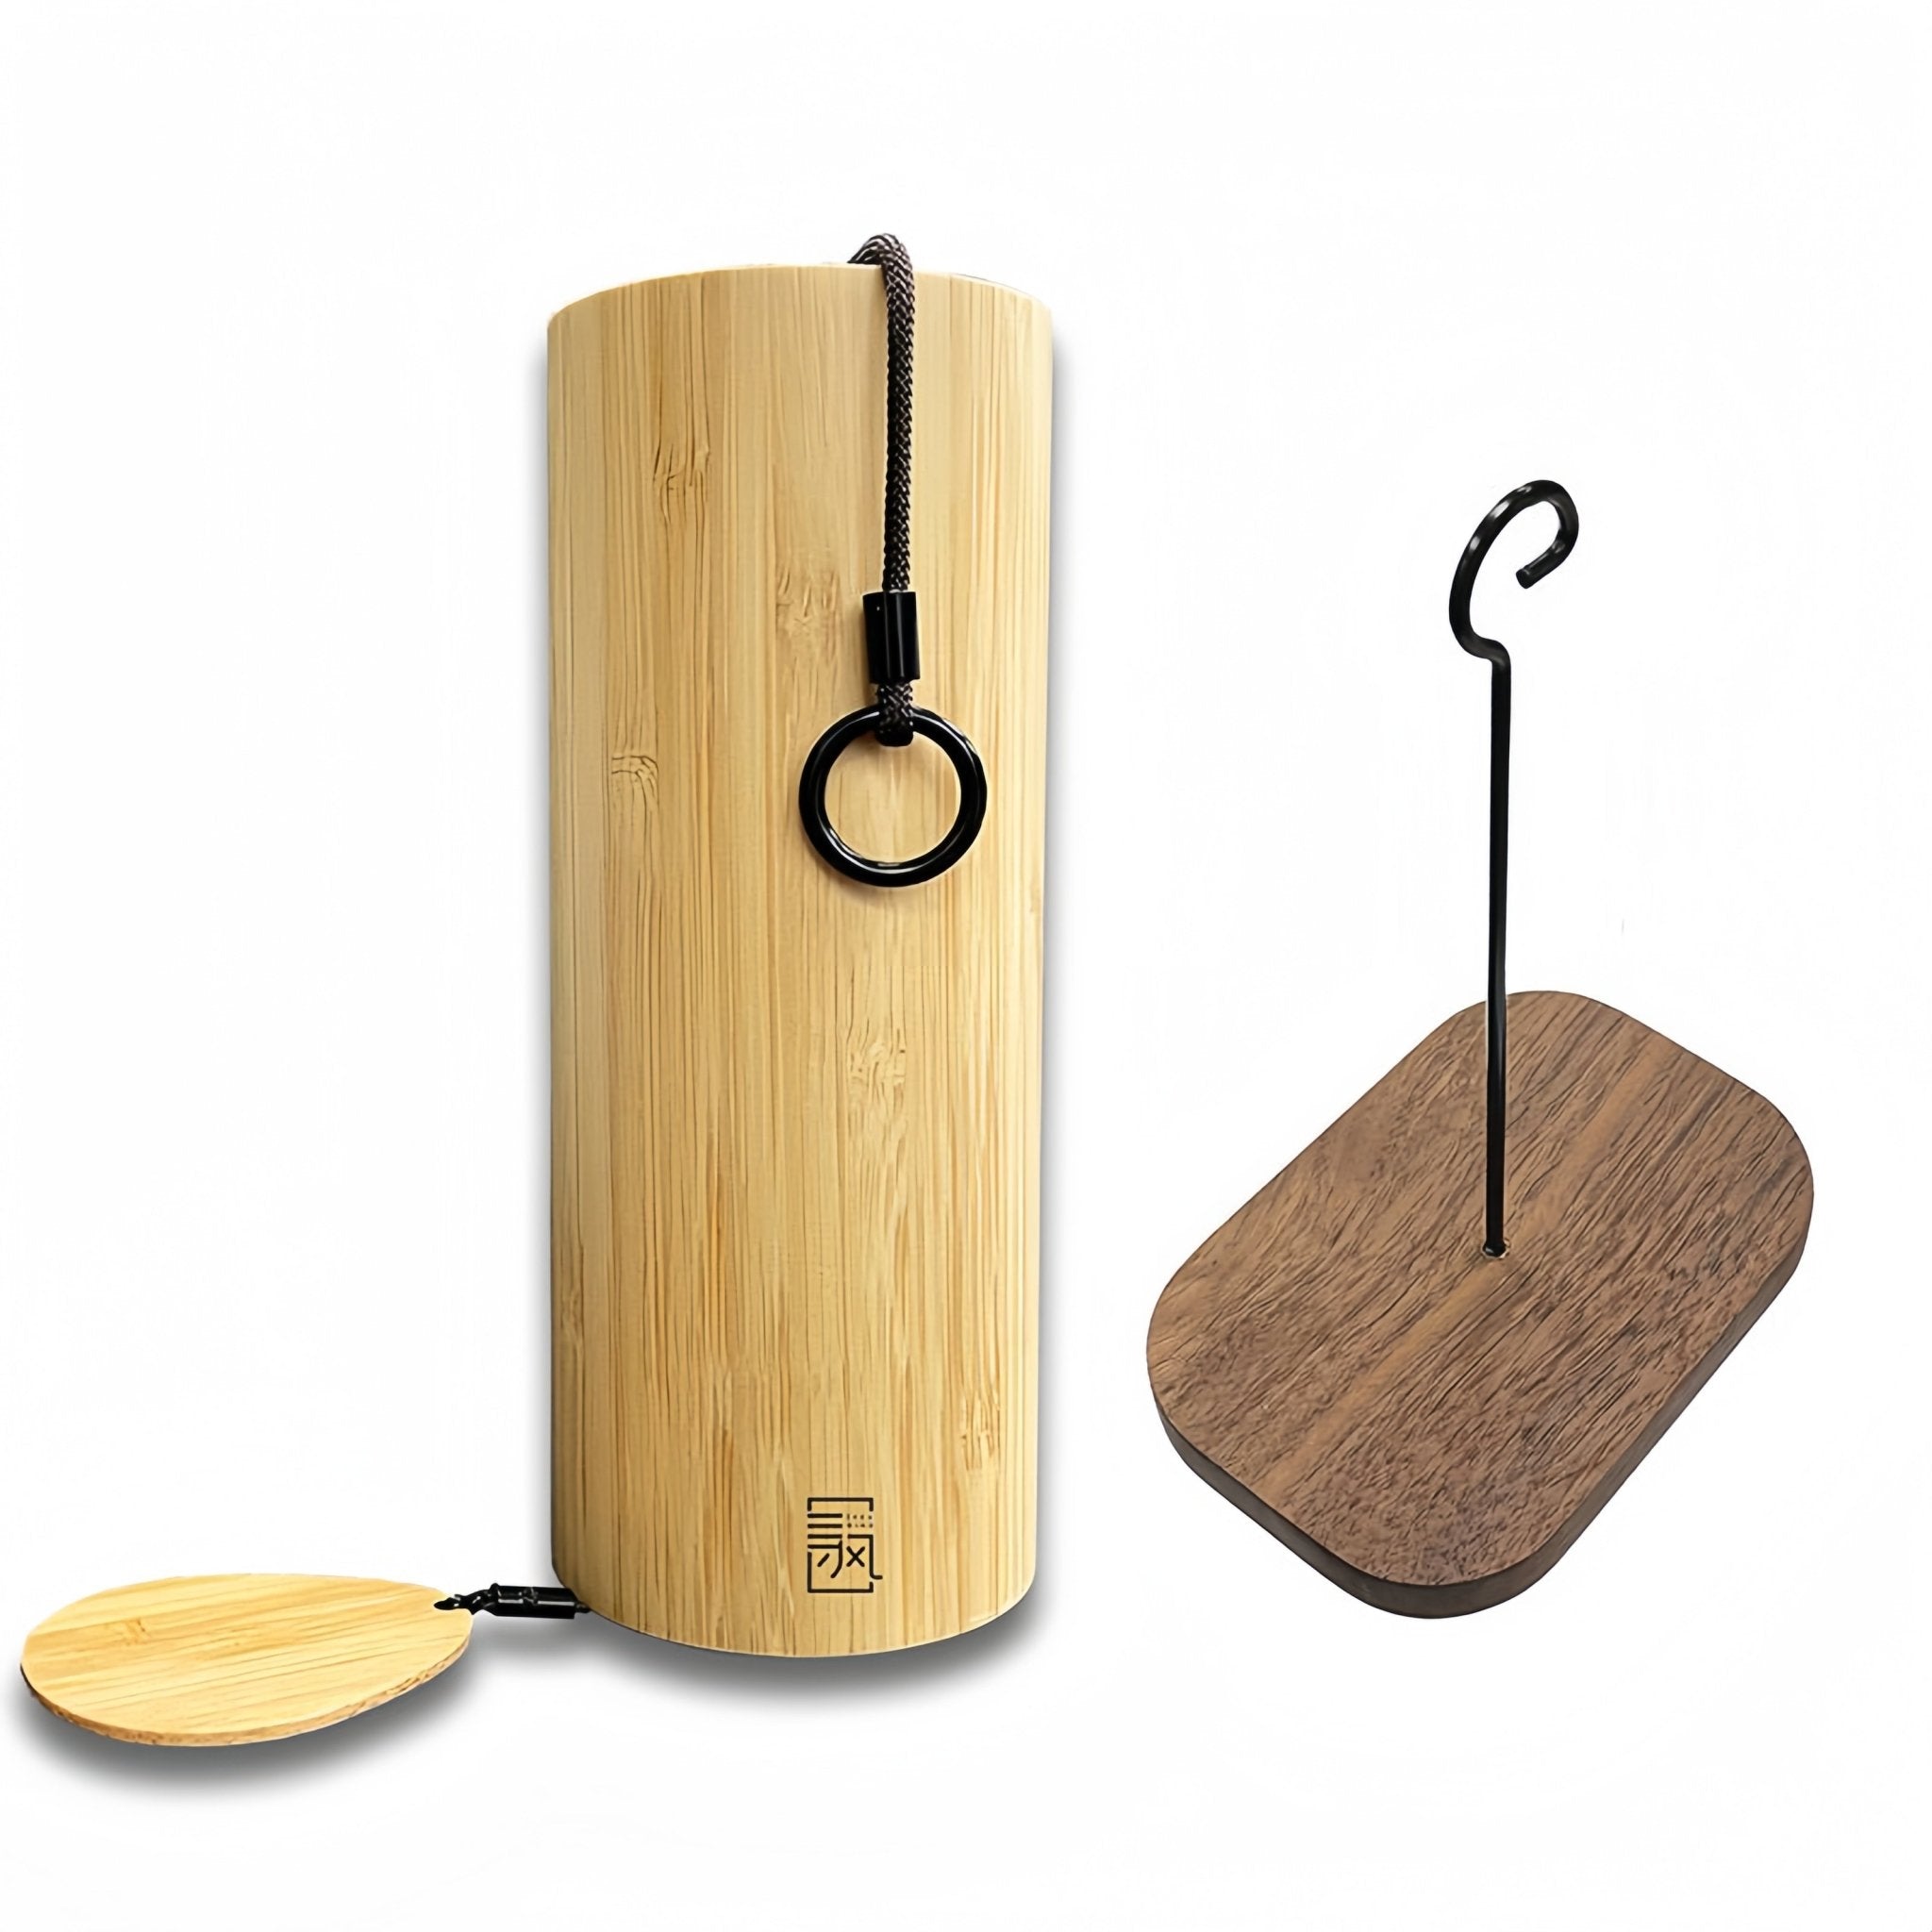 Bamboo wind chime with accompanying adhesive hanger